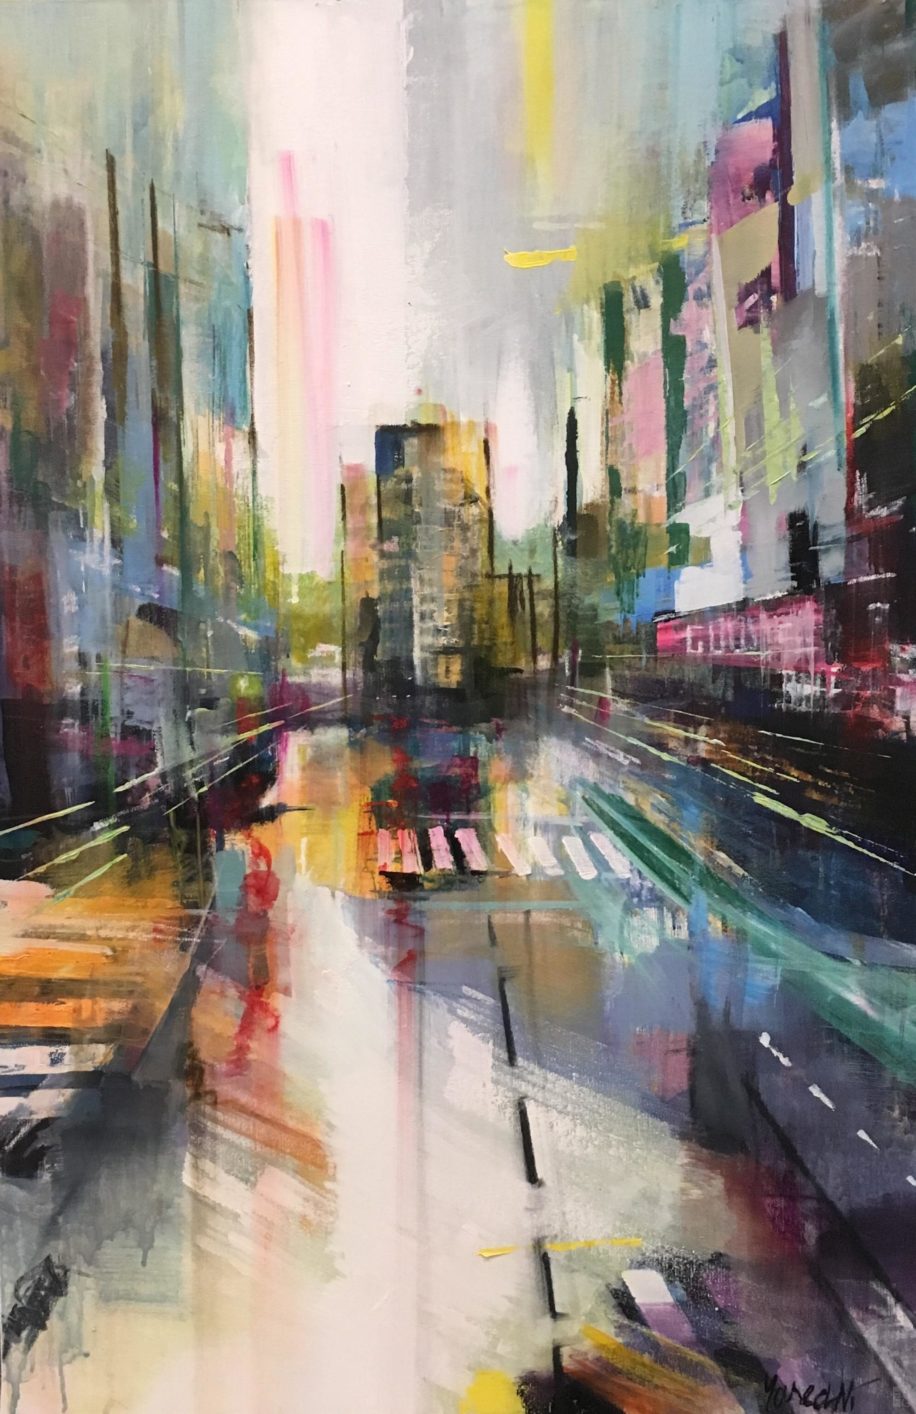 New York City painting, La Cité II by Yared Nigussu at The Avenue Gallery, a contemporary fine art gallery in Victoria, BC, Canada.